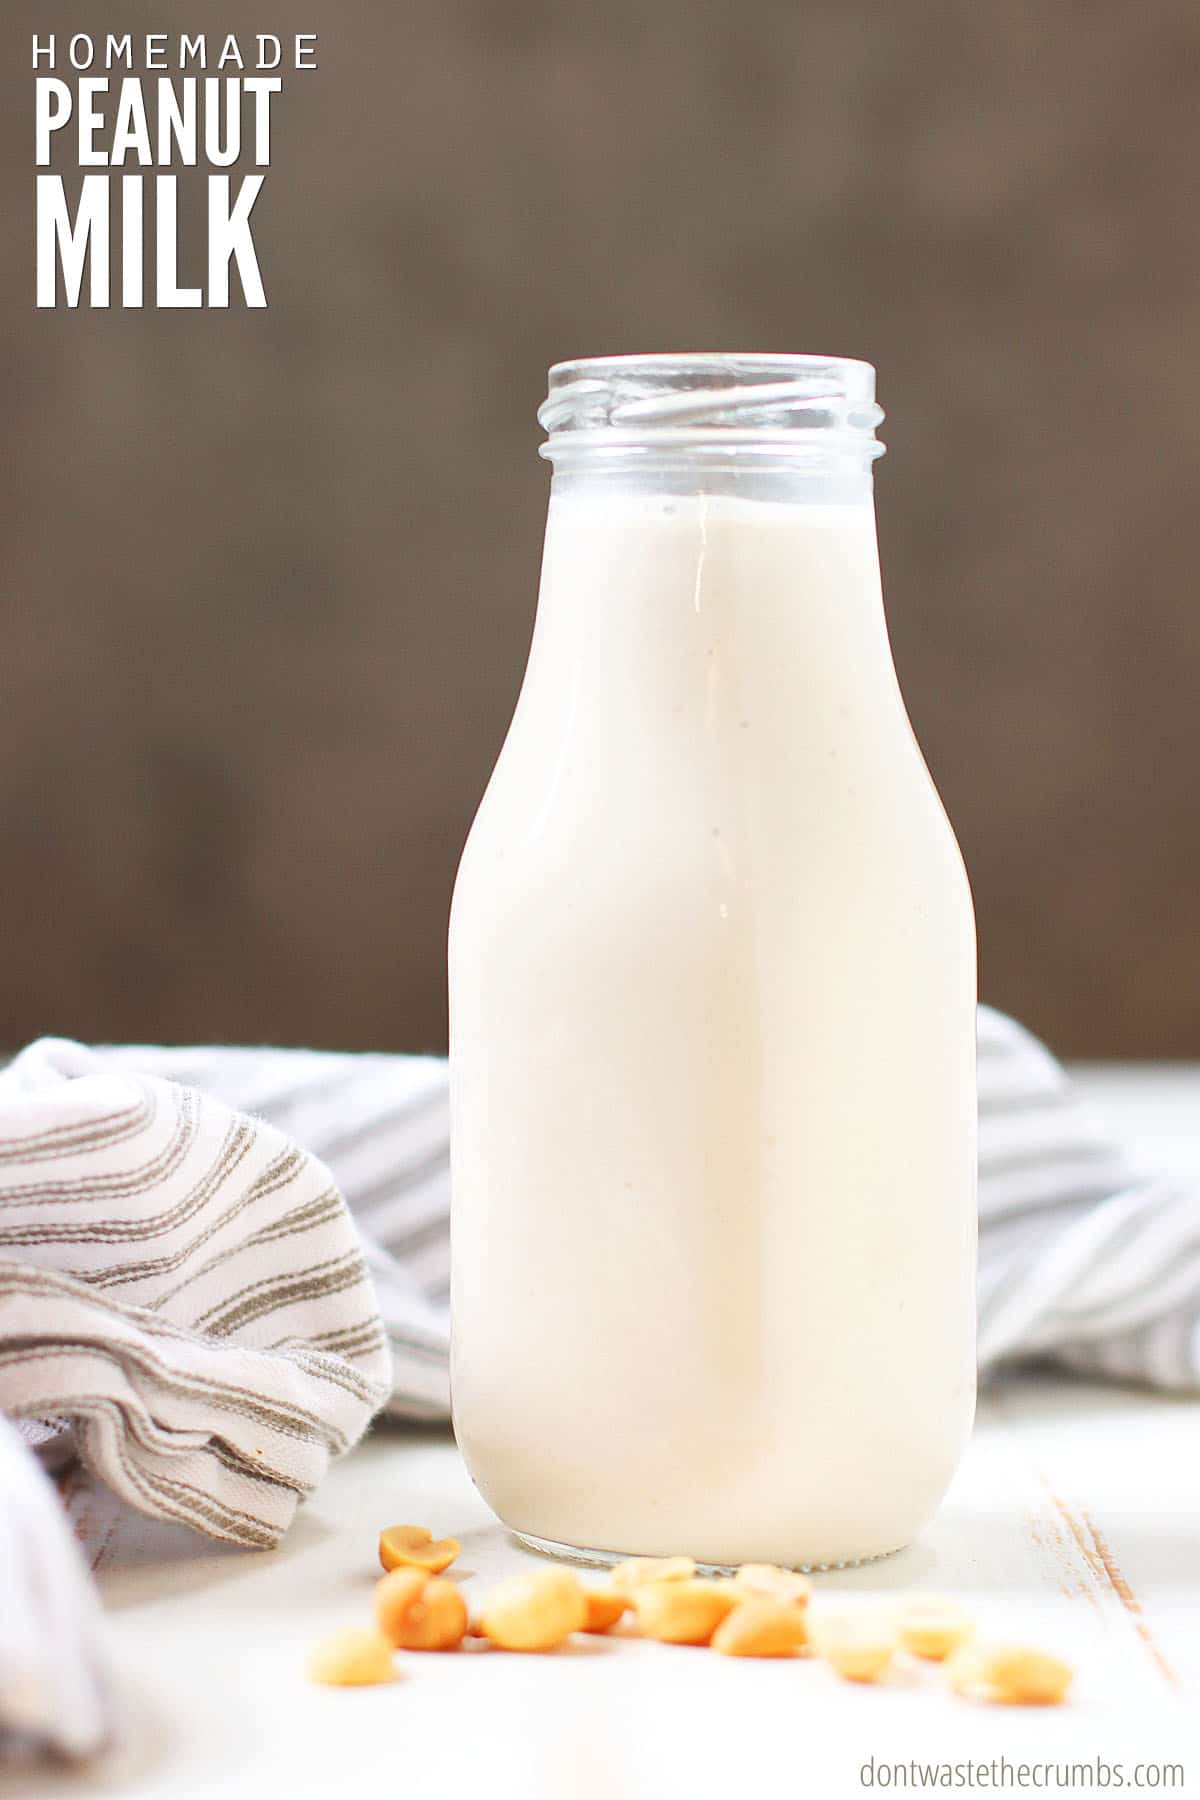 A freshly made bottle of homemade peanut milk. It's the perfect dairy alternative.